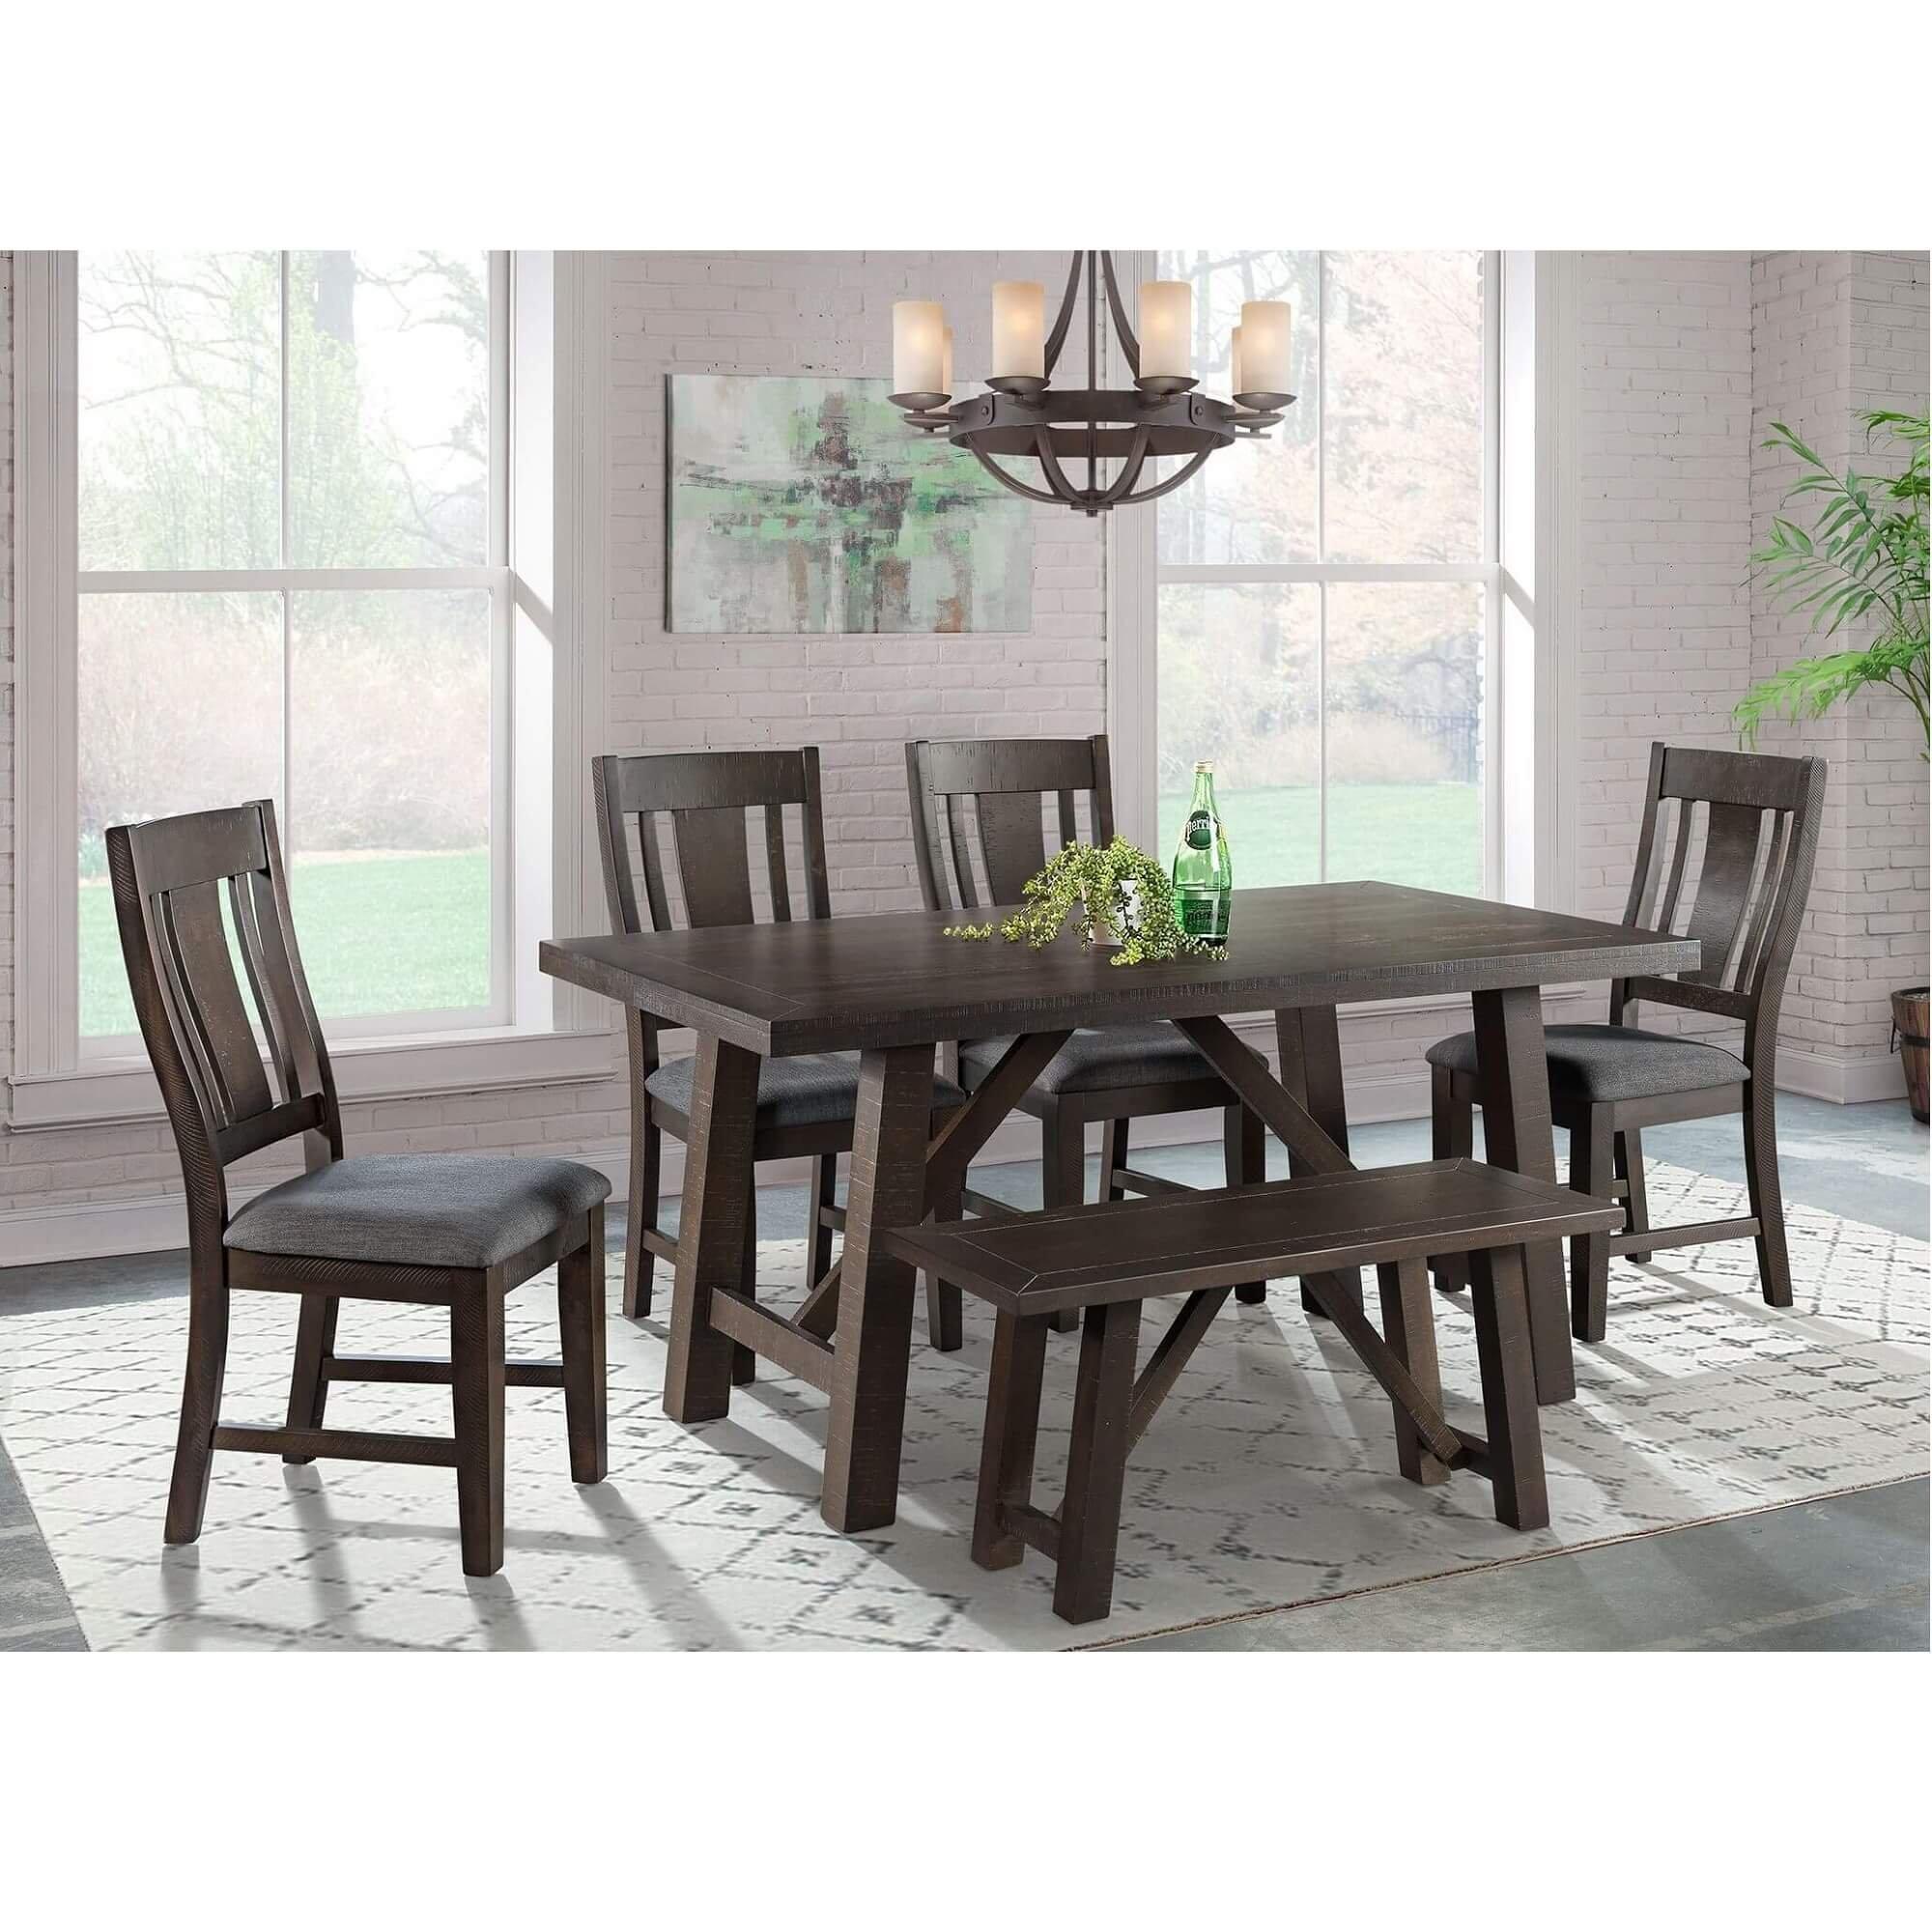 Rent to Own Elements International 6-Piece Cash Dining Room Collection